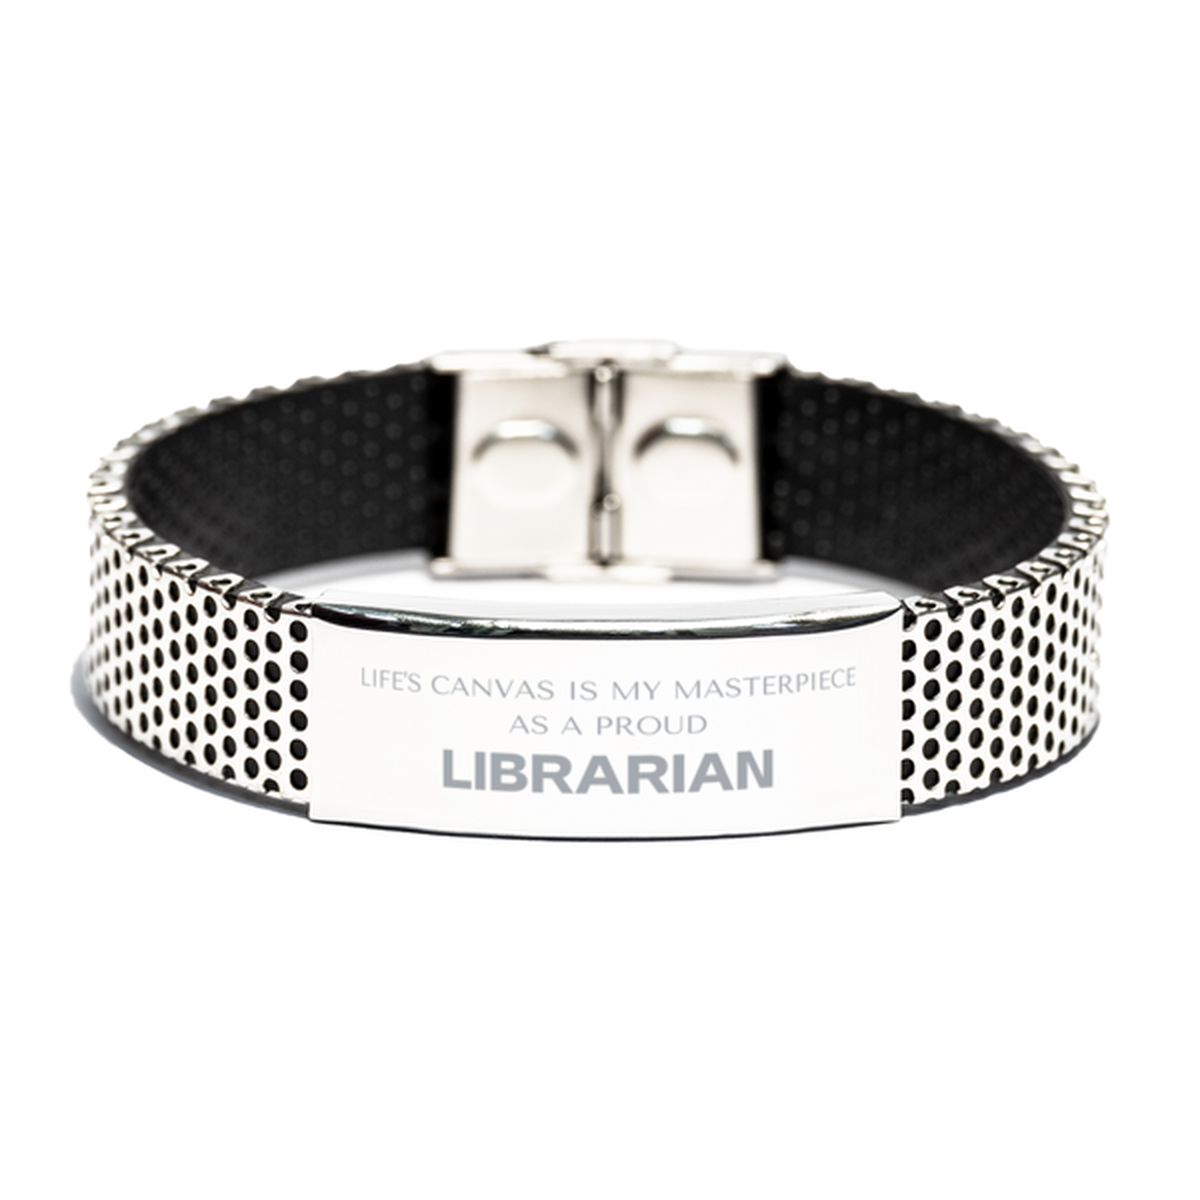 Proud Librarian Gifts, Life's canvas is my masterpiece, Epic Birthday Christmas Unique Stainless Steel Bracelet For Librarian, Coworkers, Men, Women, Friends